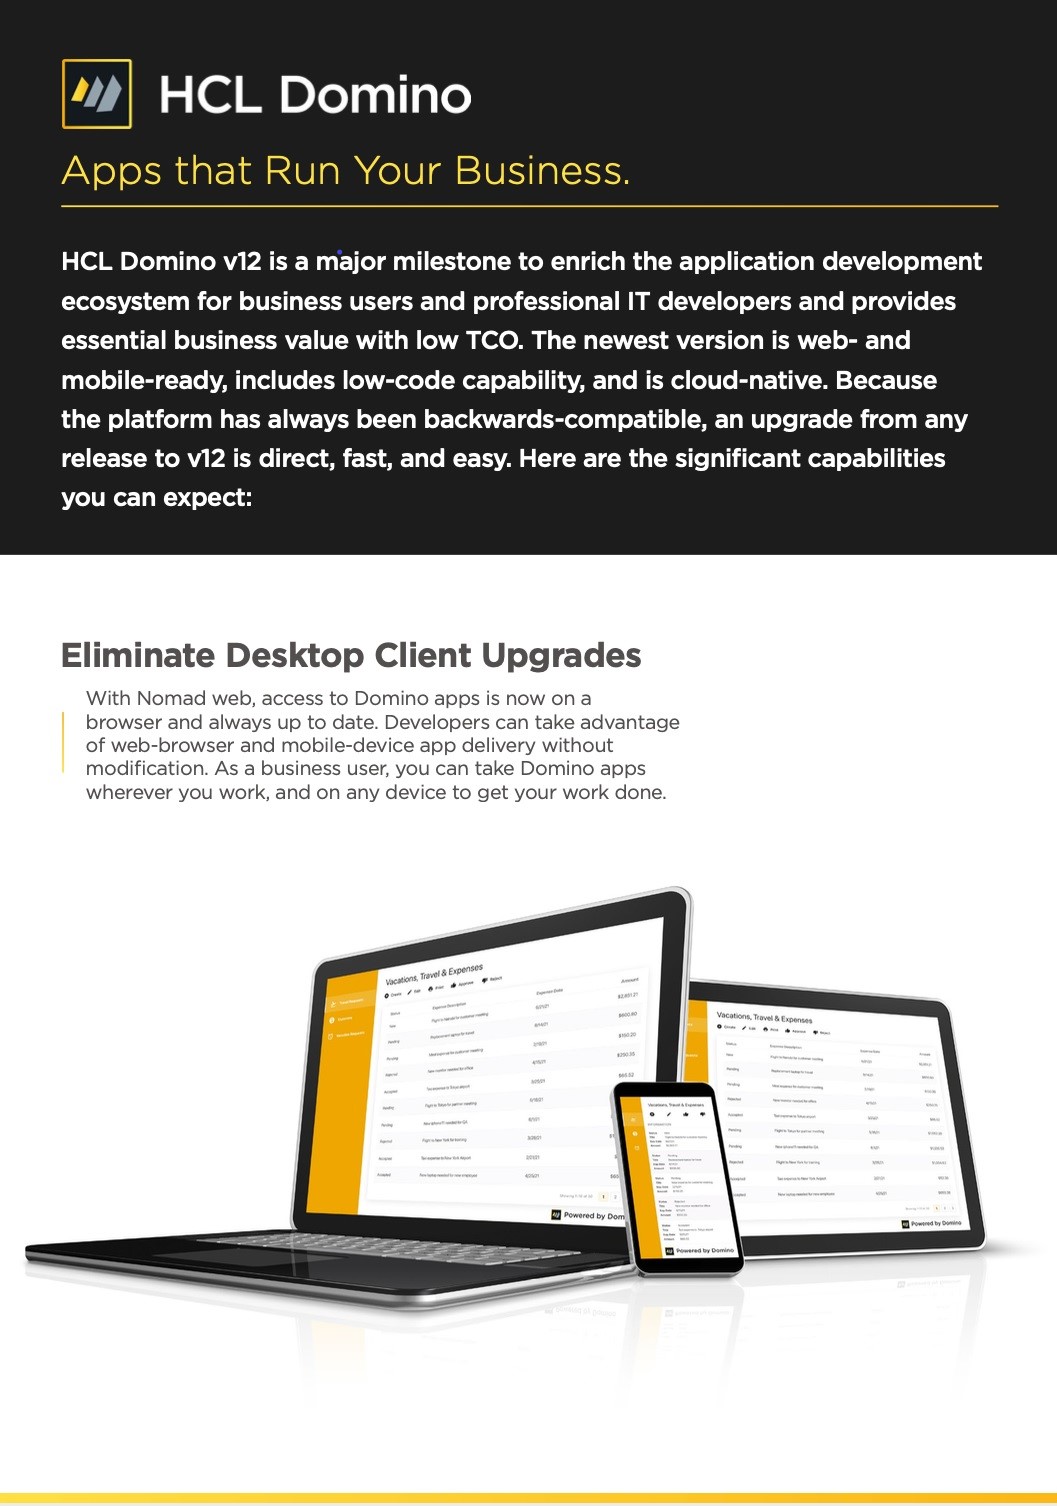 HCL Notes and Domino v12 Key Features and Benefits